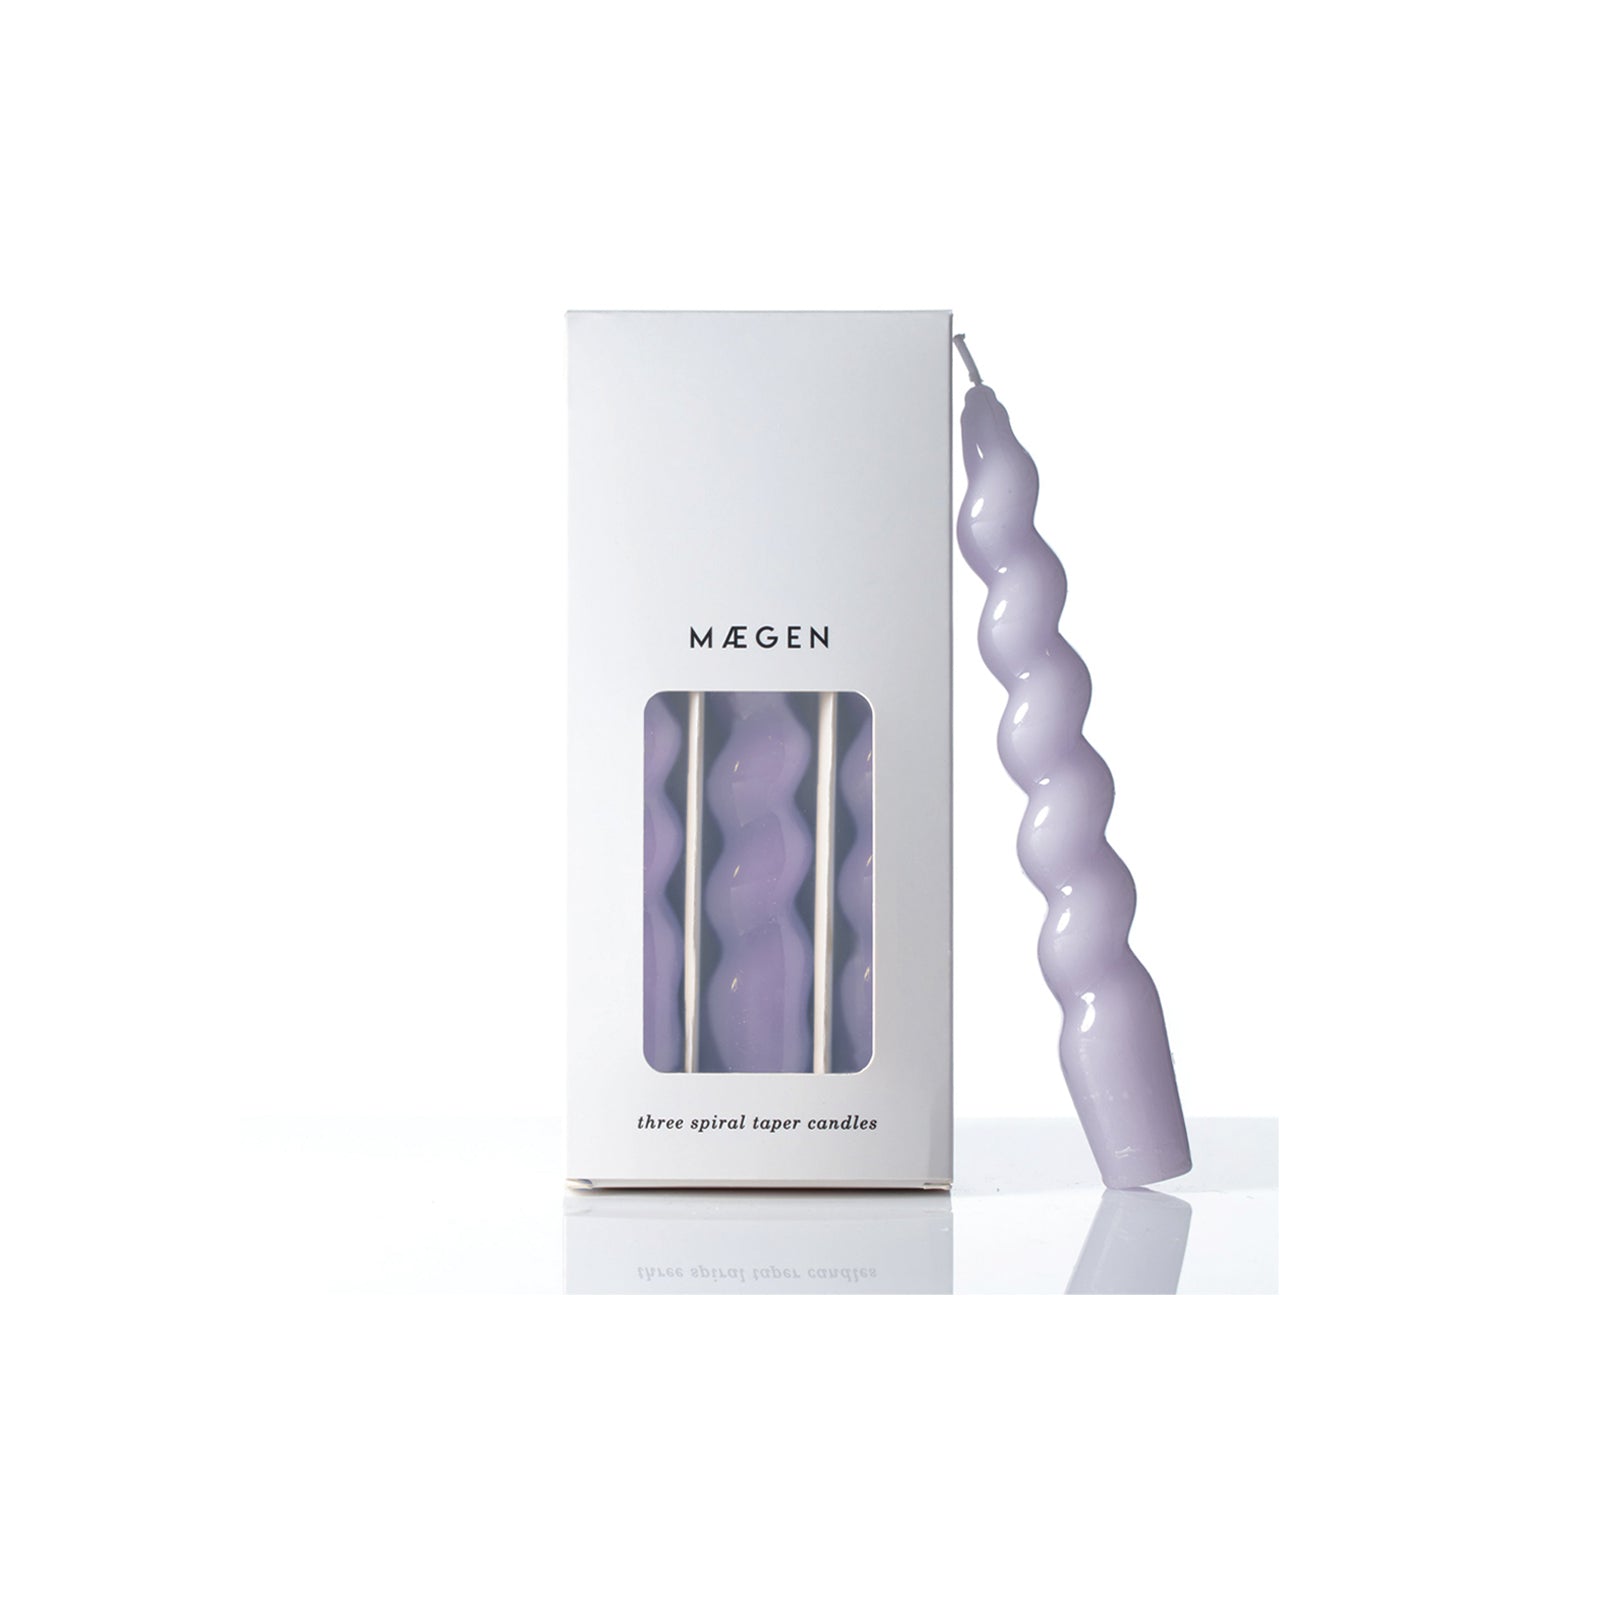 18cm Spiral Taper Candles - Lilac 3 pack